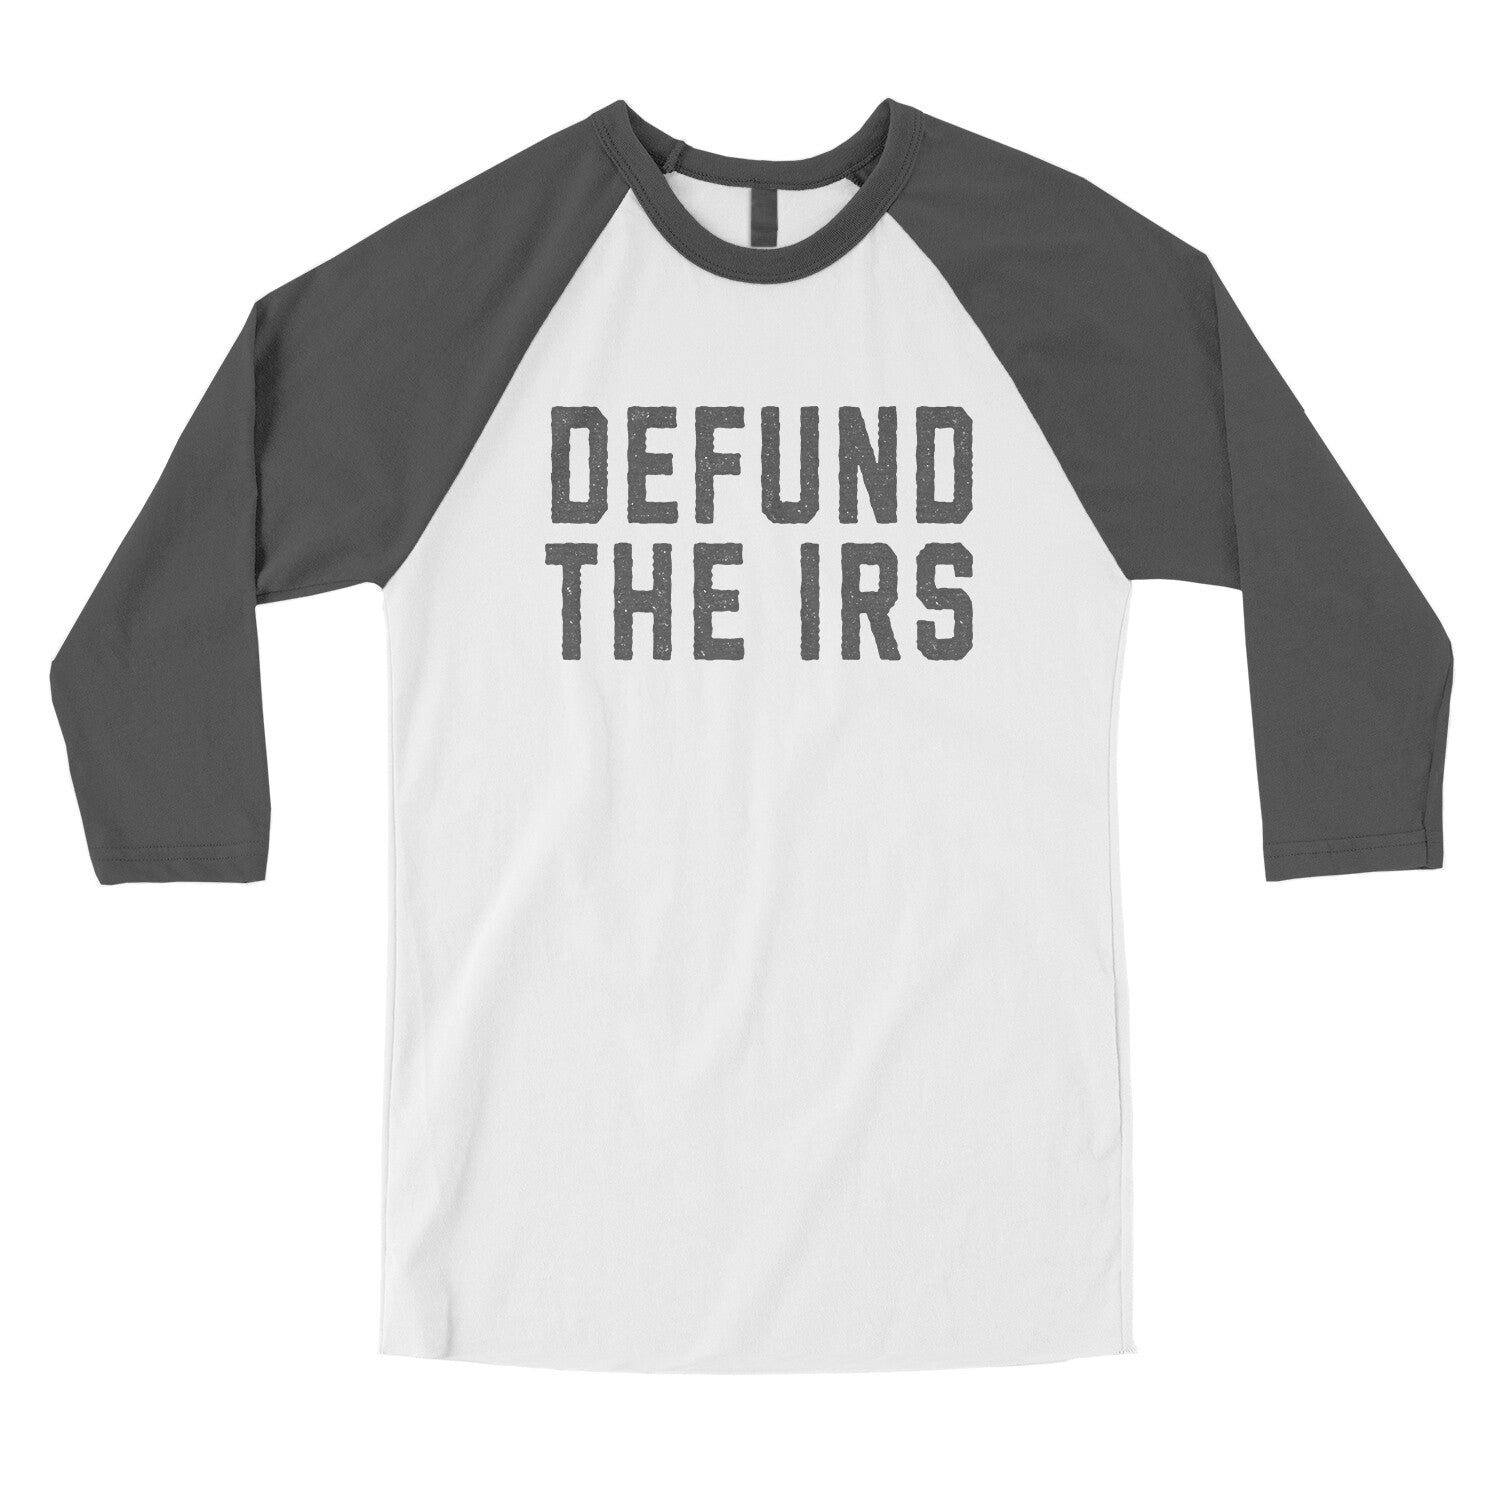 Defund the IRS in White with Asphalt Color